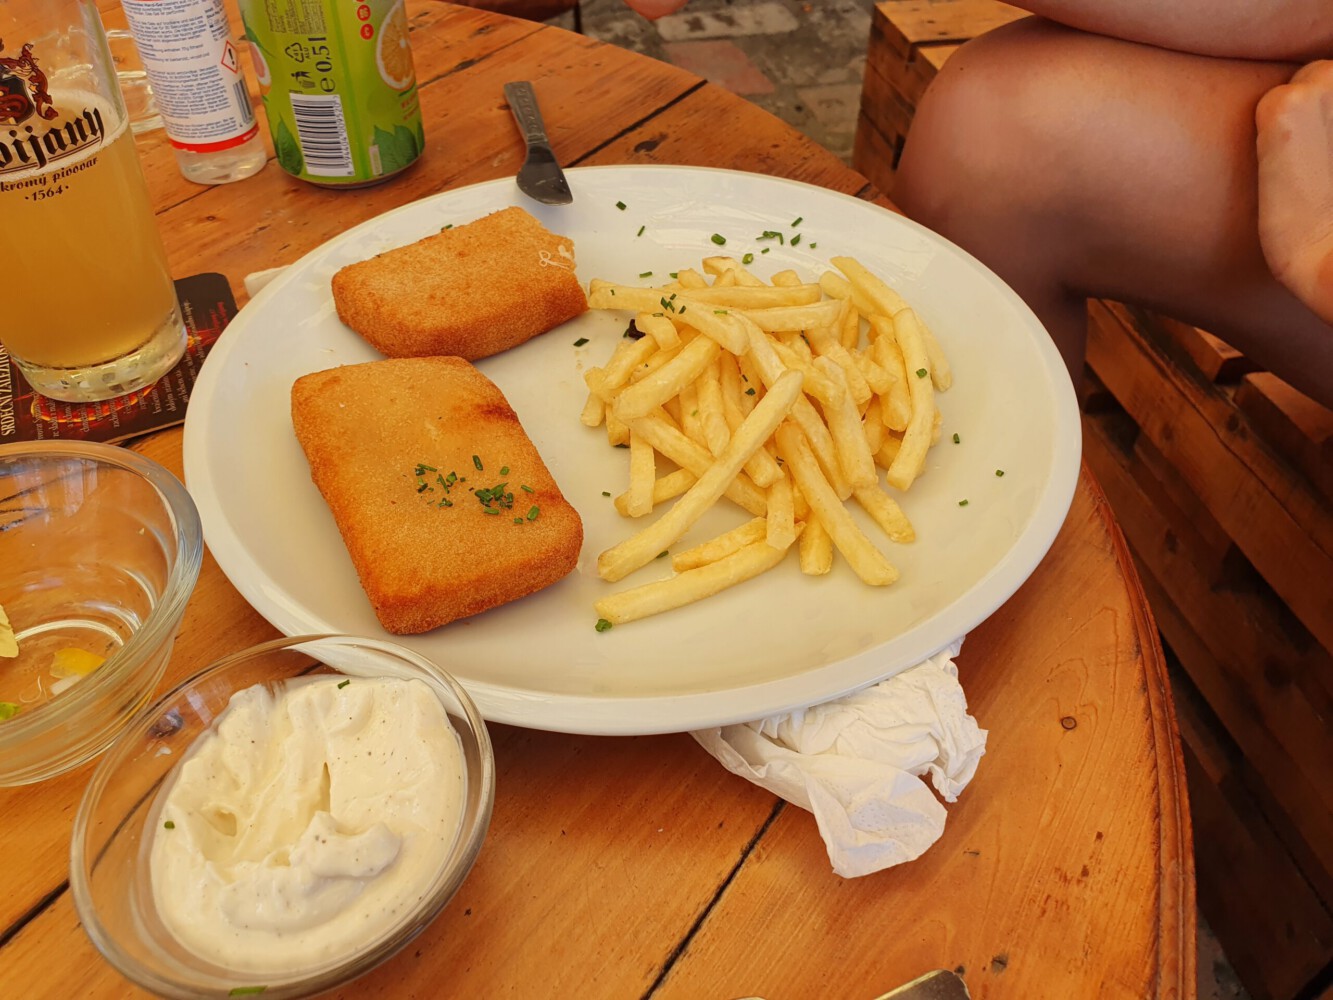 Fried cheese and fries - Alinas lunch.